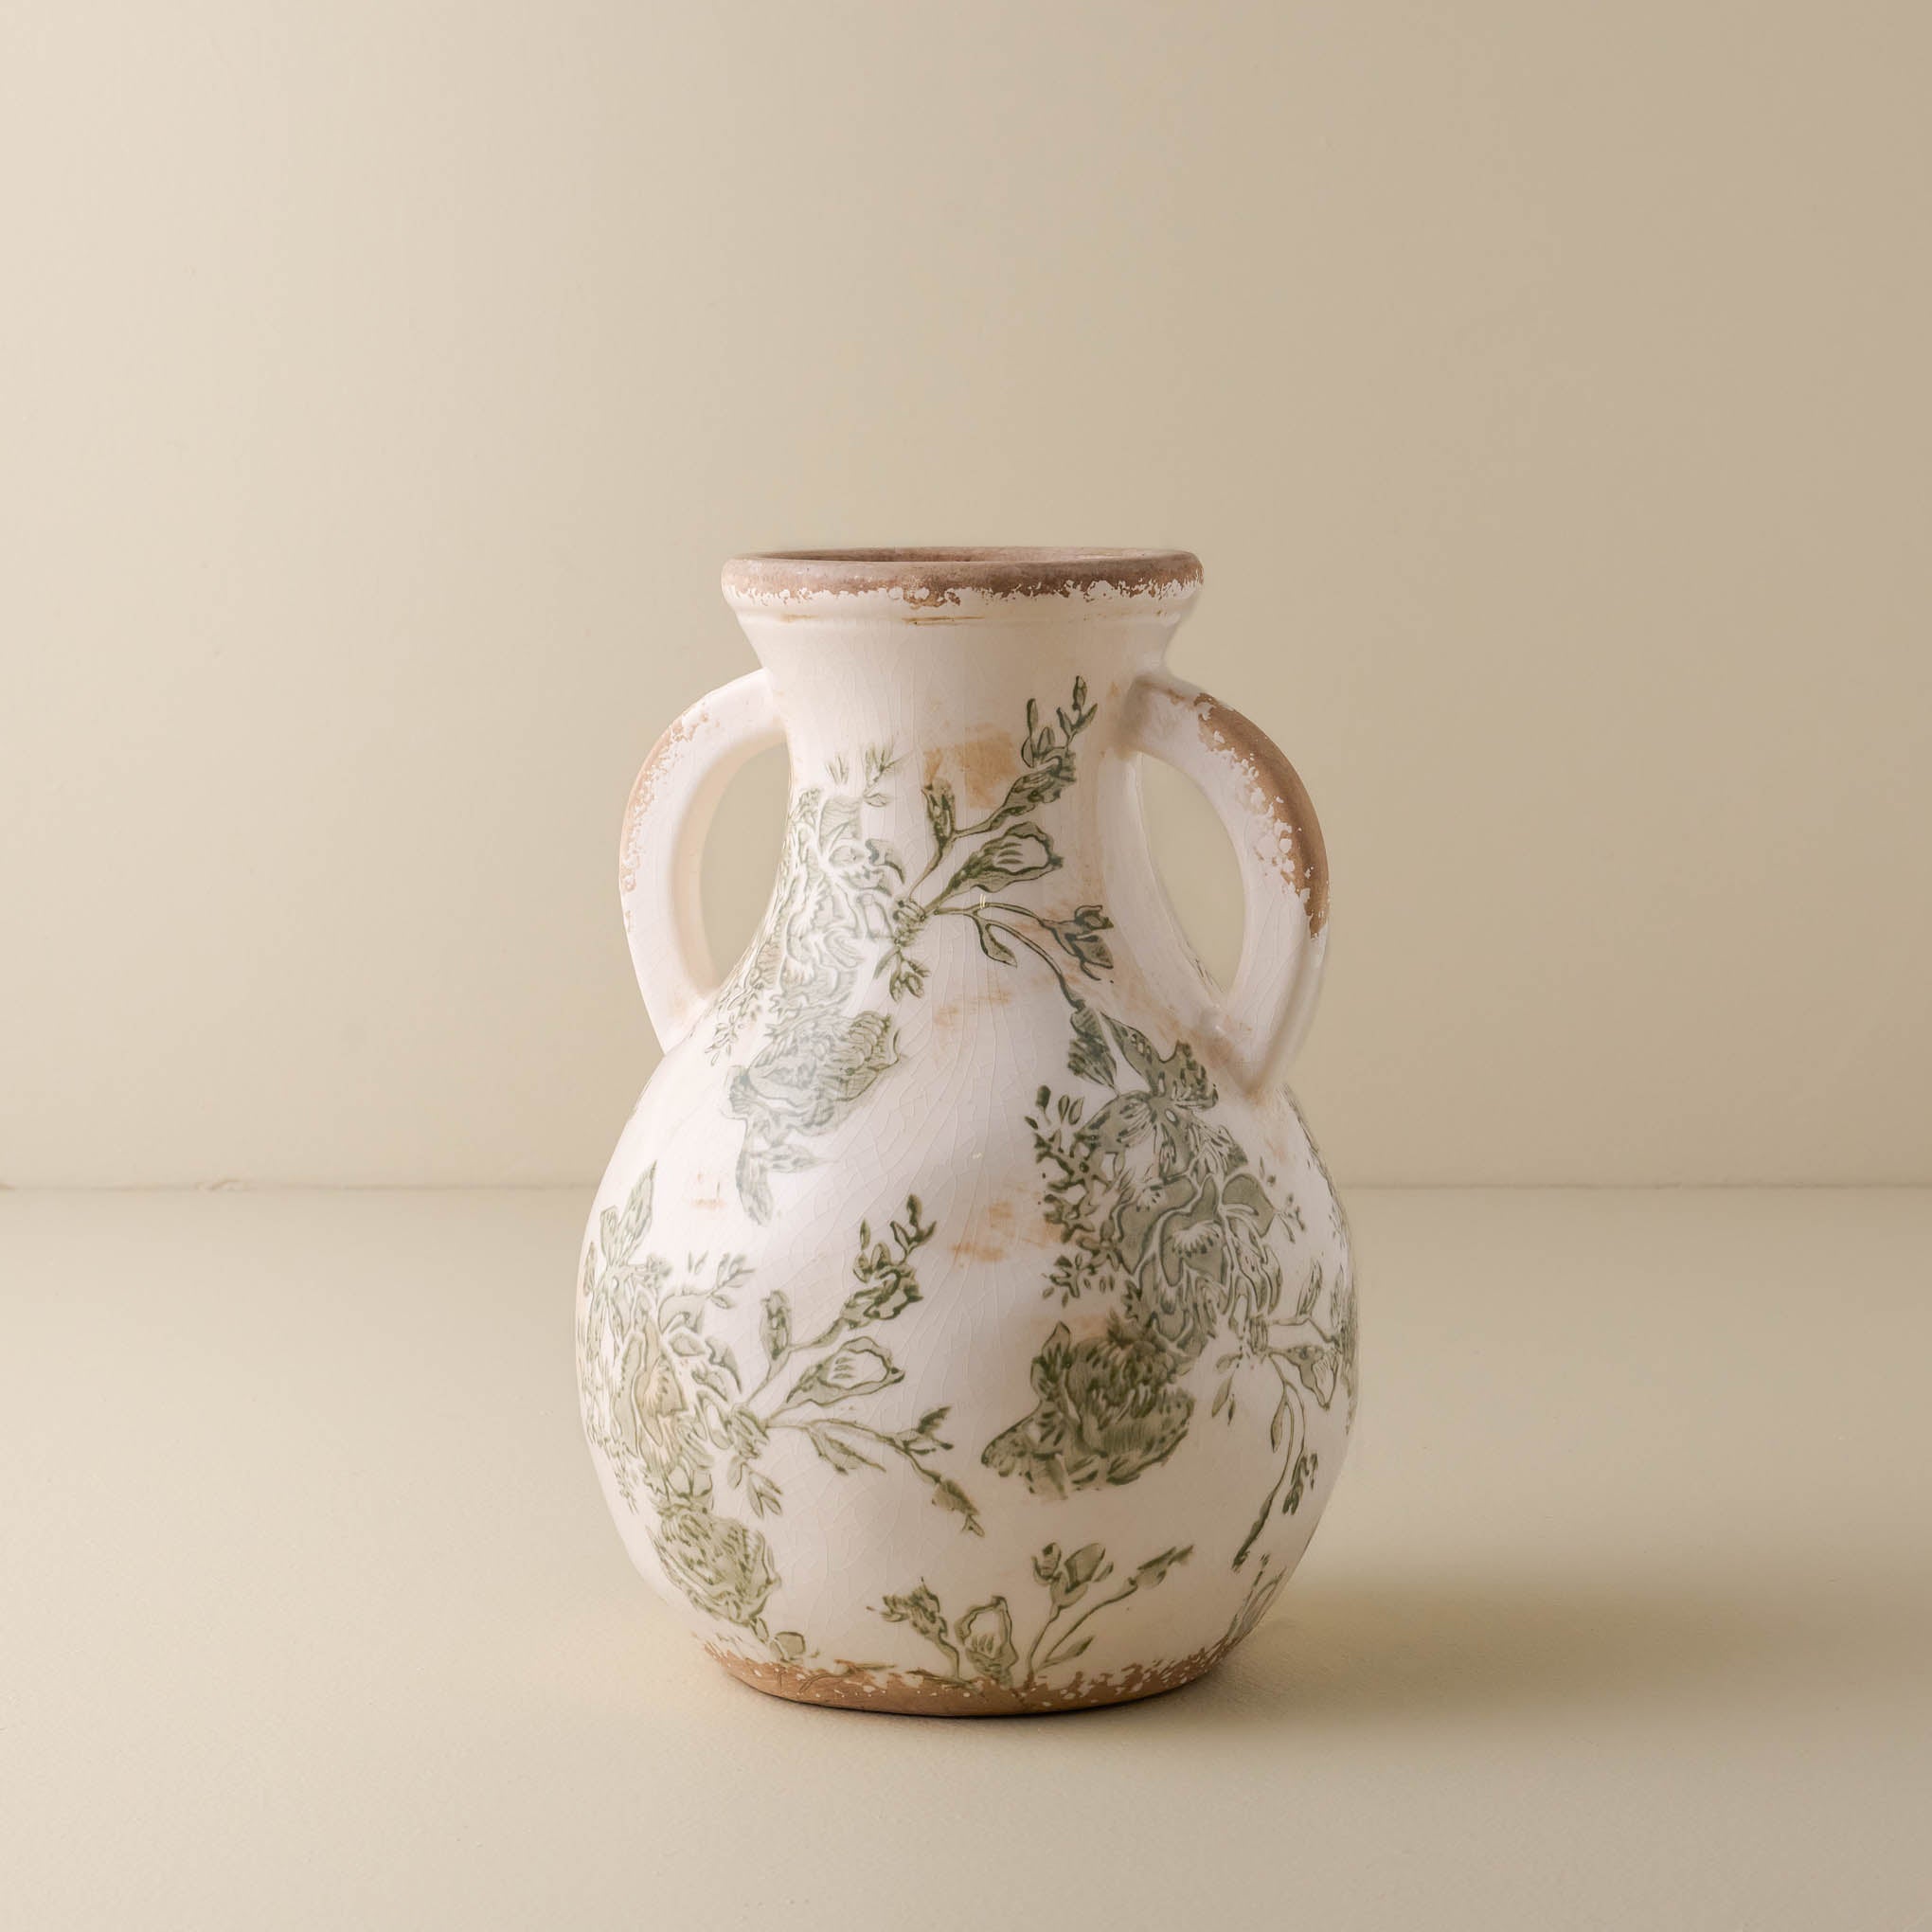 small sized Green and White floral Distressed Vase with two handles $48.00